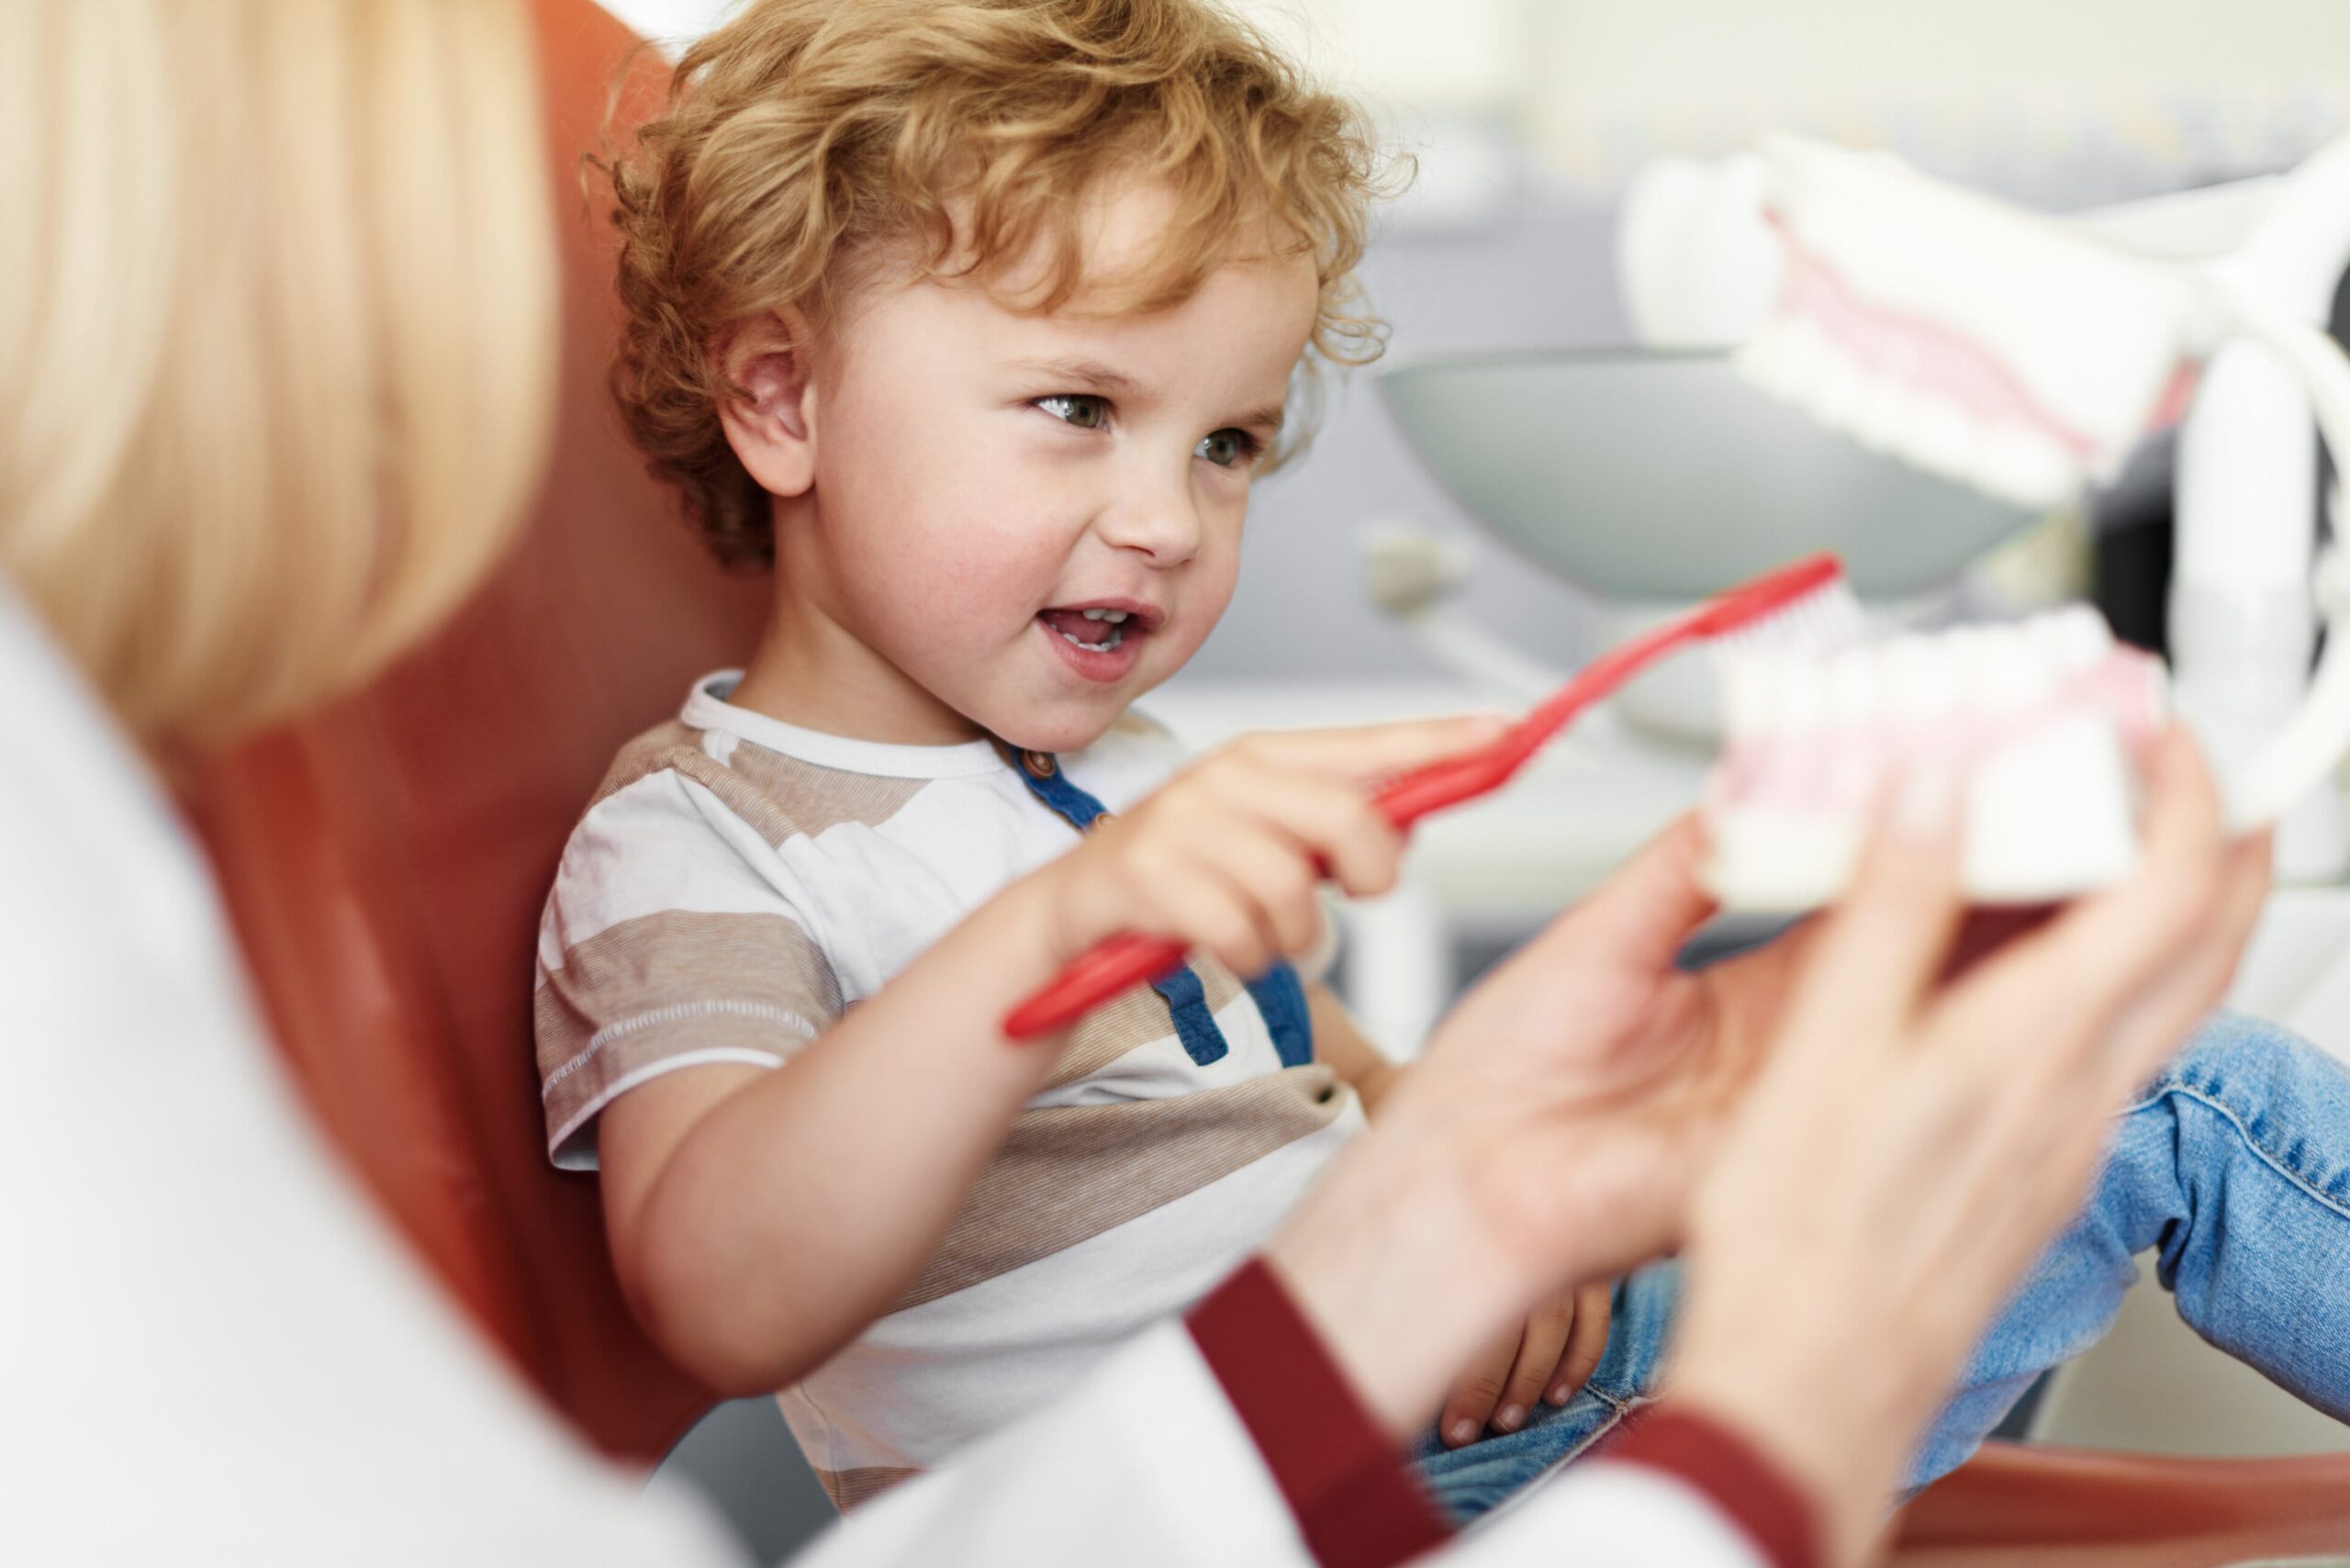 When should your child visit the dentist